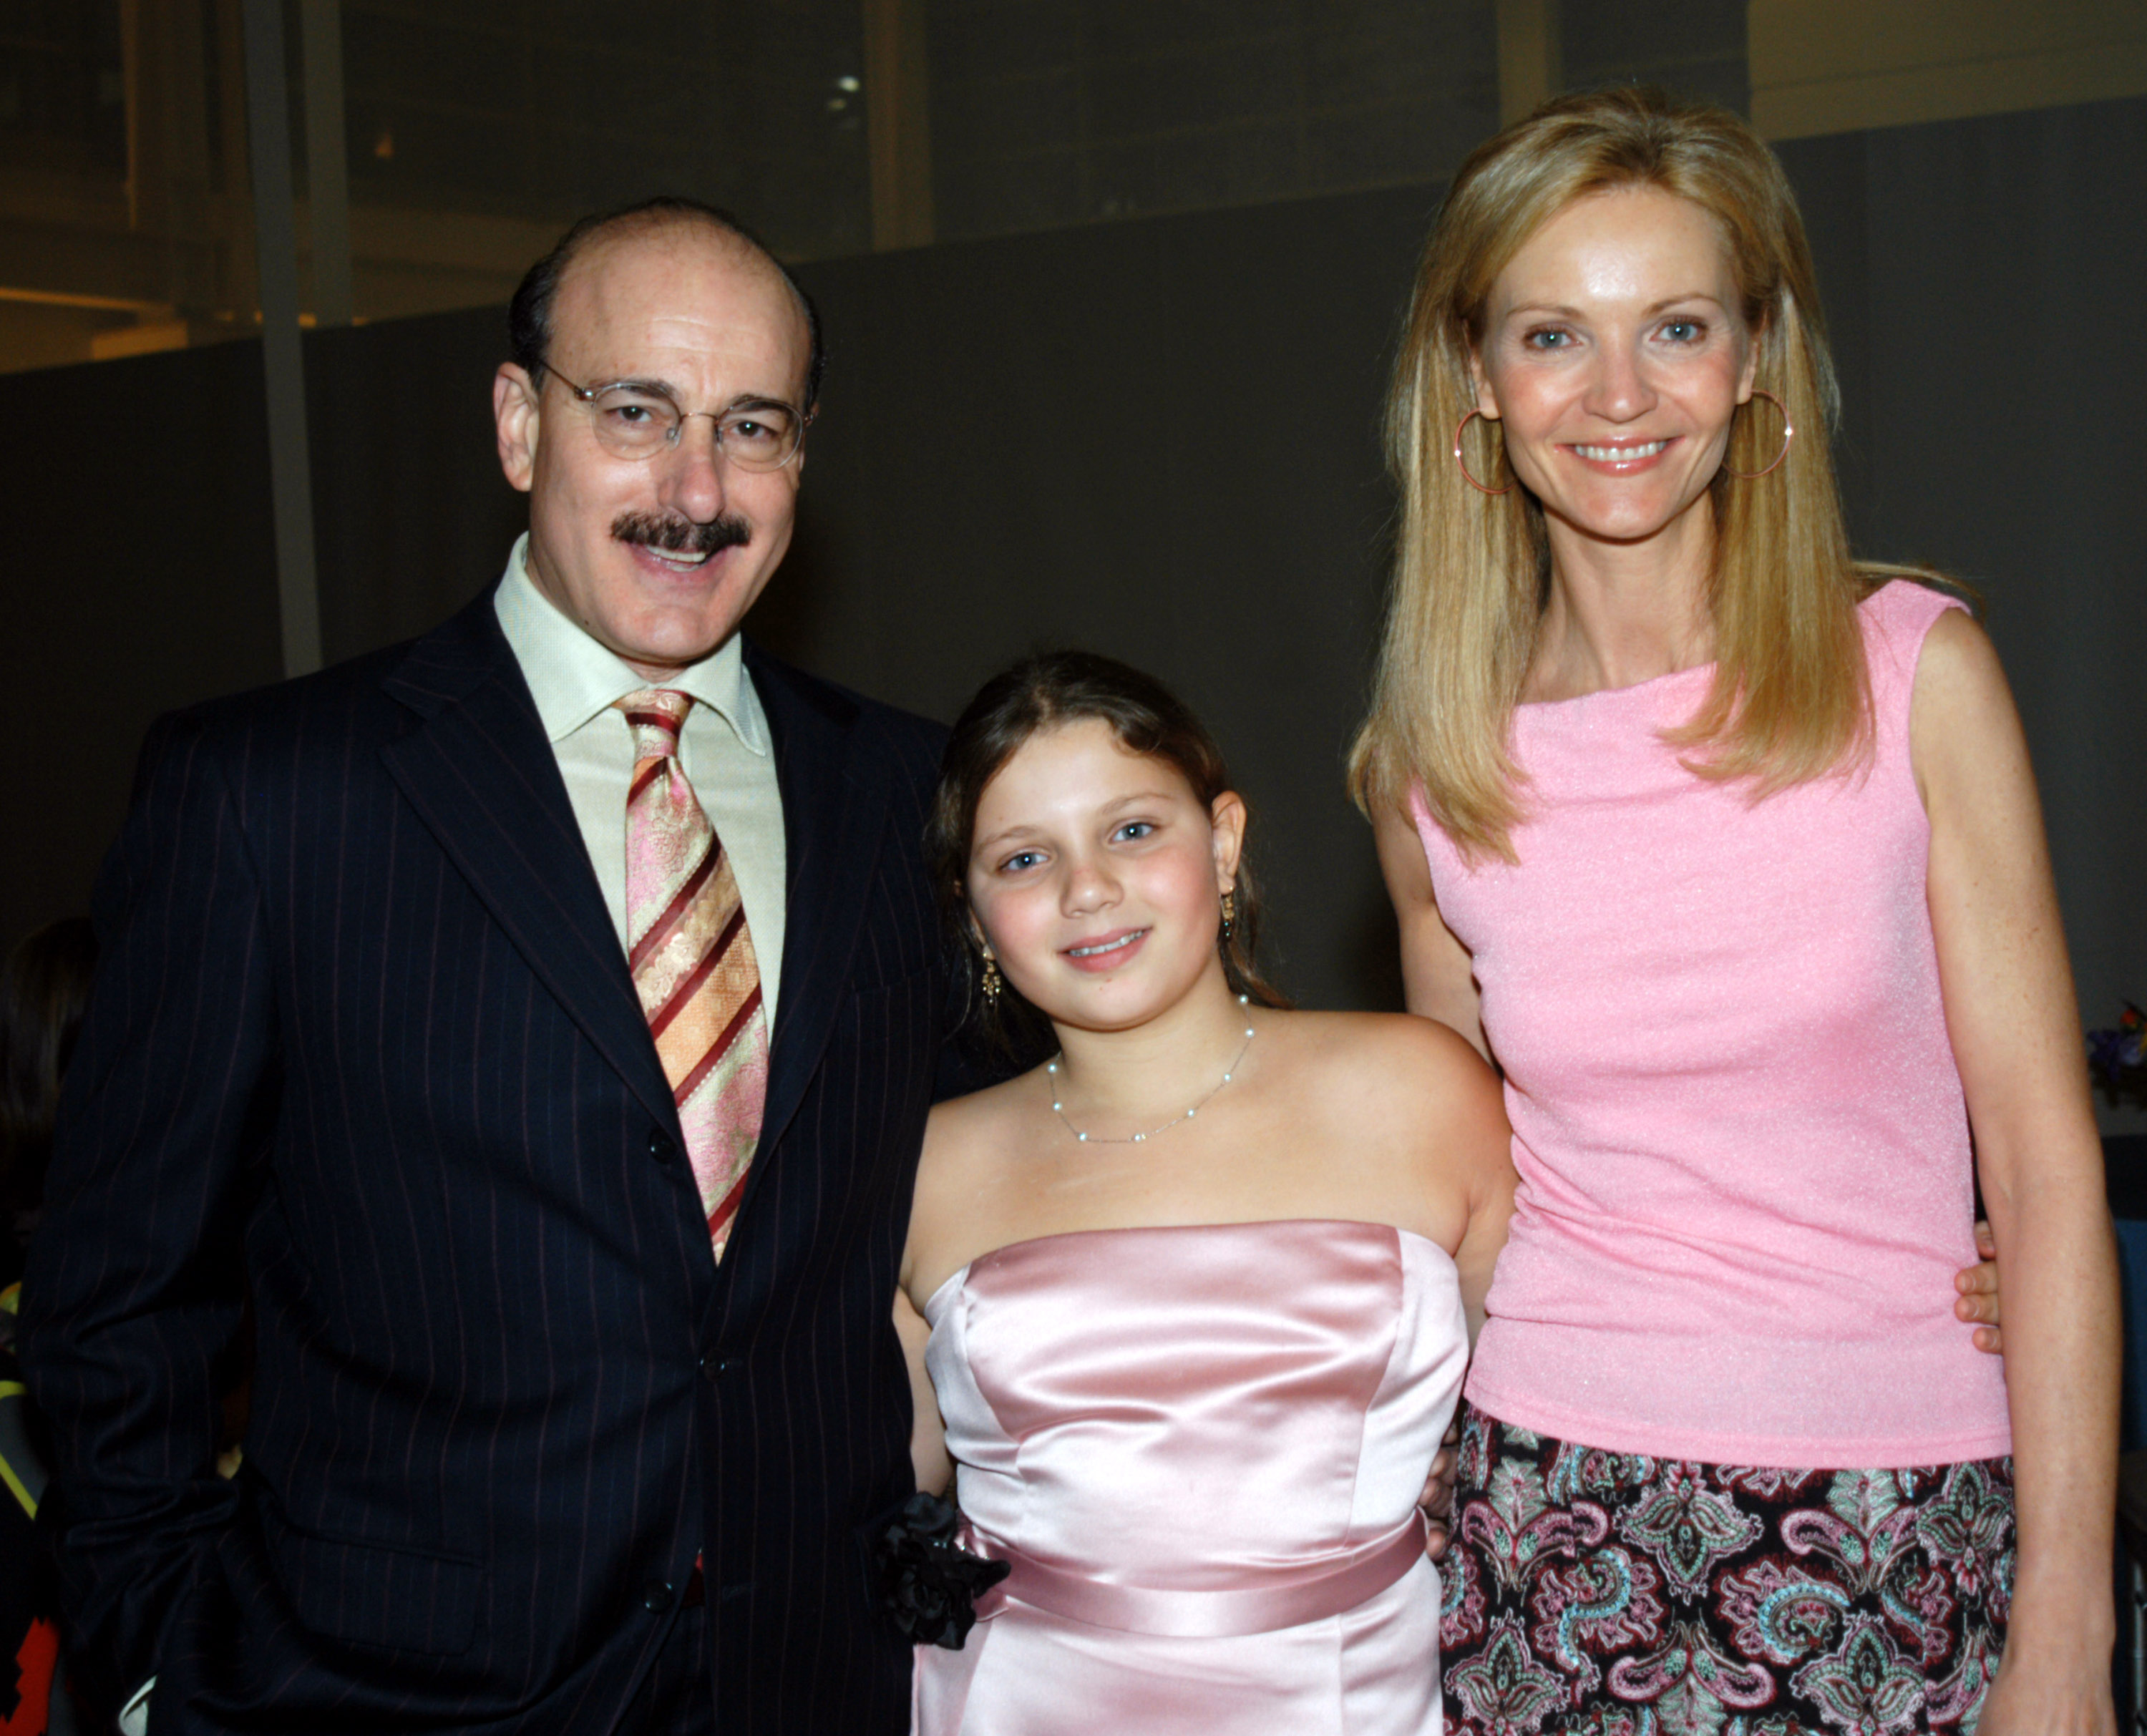 Peter Friedman pictured with his daughter Sadie Friedman and wife Joan Allen at the Calhoun School Benefit Gala on October 18, 2004 | Source: Getty Images